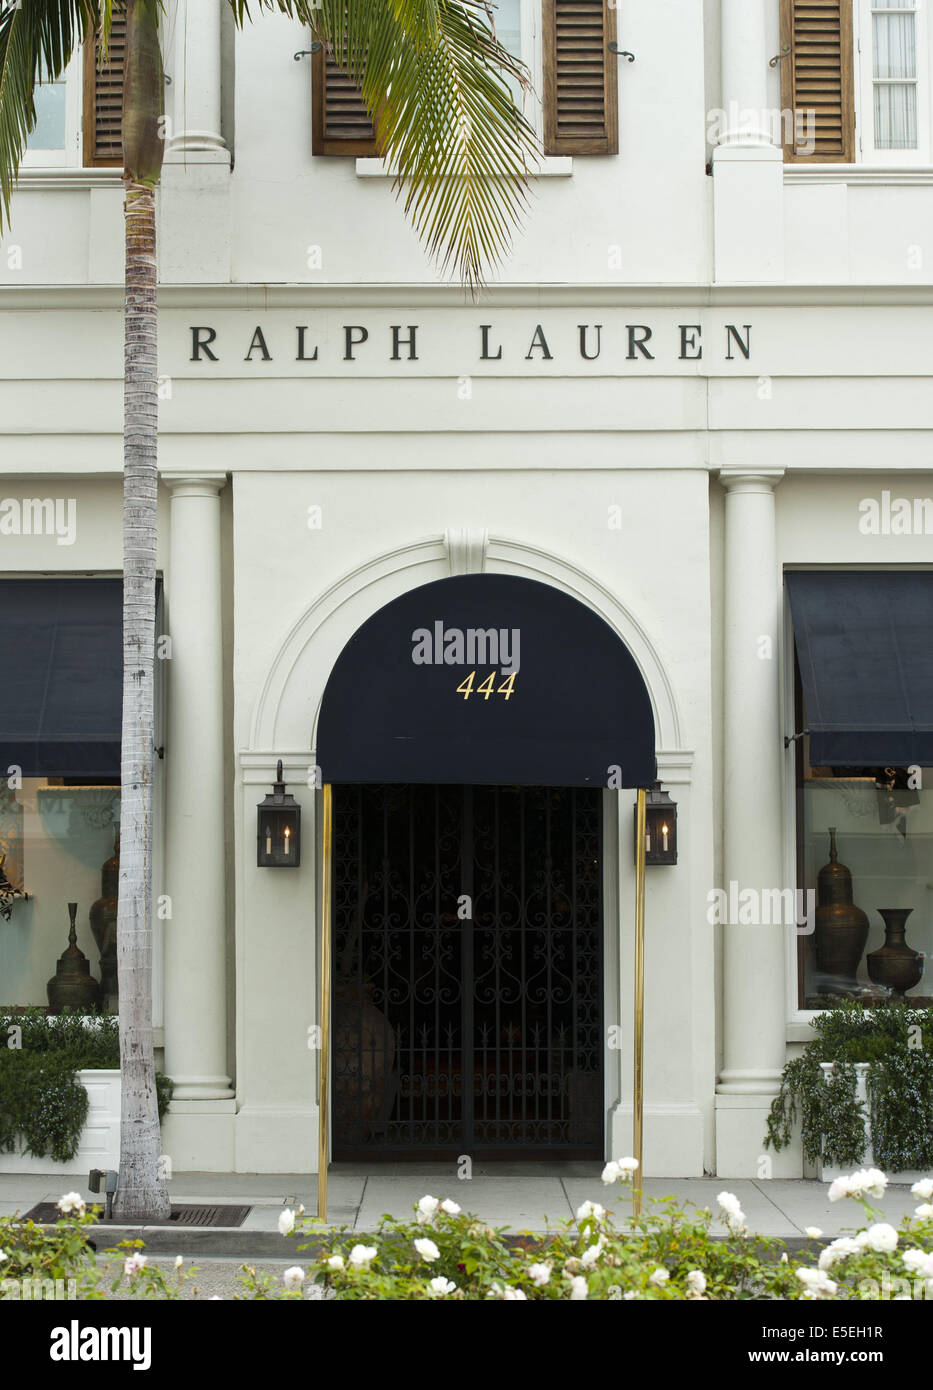 June 23, 2014 - Beverly Hills/Los Angeles, California, U.S - Ralph Lauren  opened his first boutique, 'Polo,' on Rodeo Drive in 1971. Lauren, working  as a tie salesmen, designed his own tie